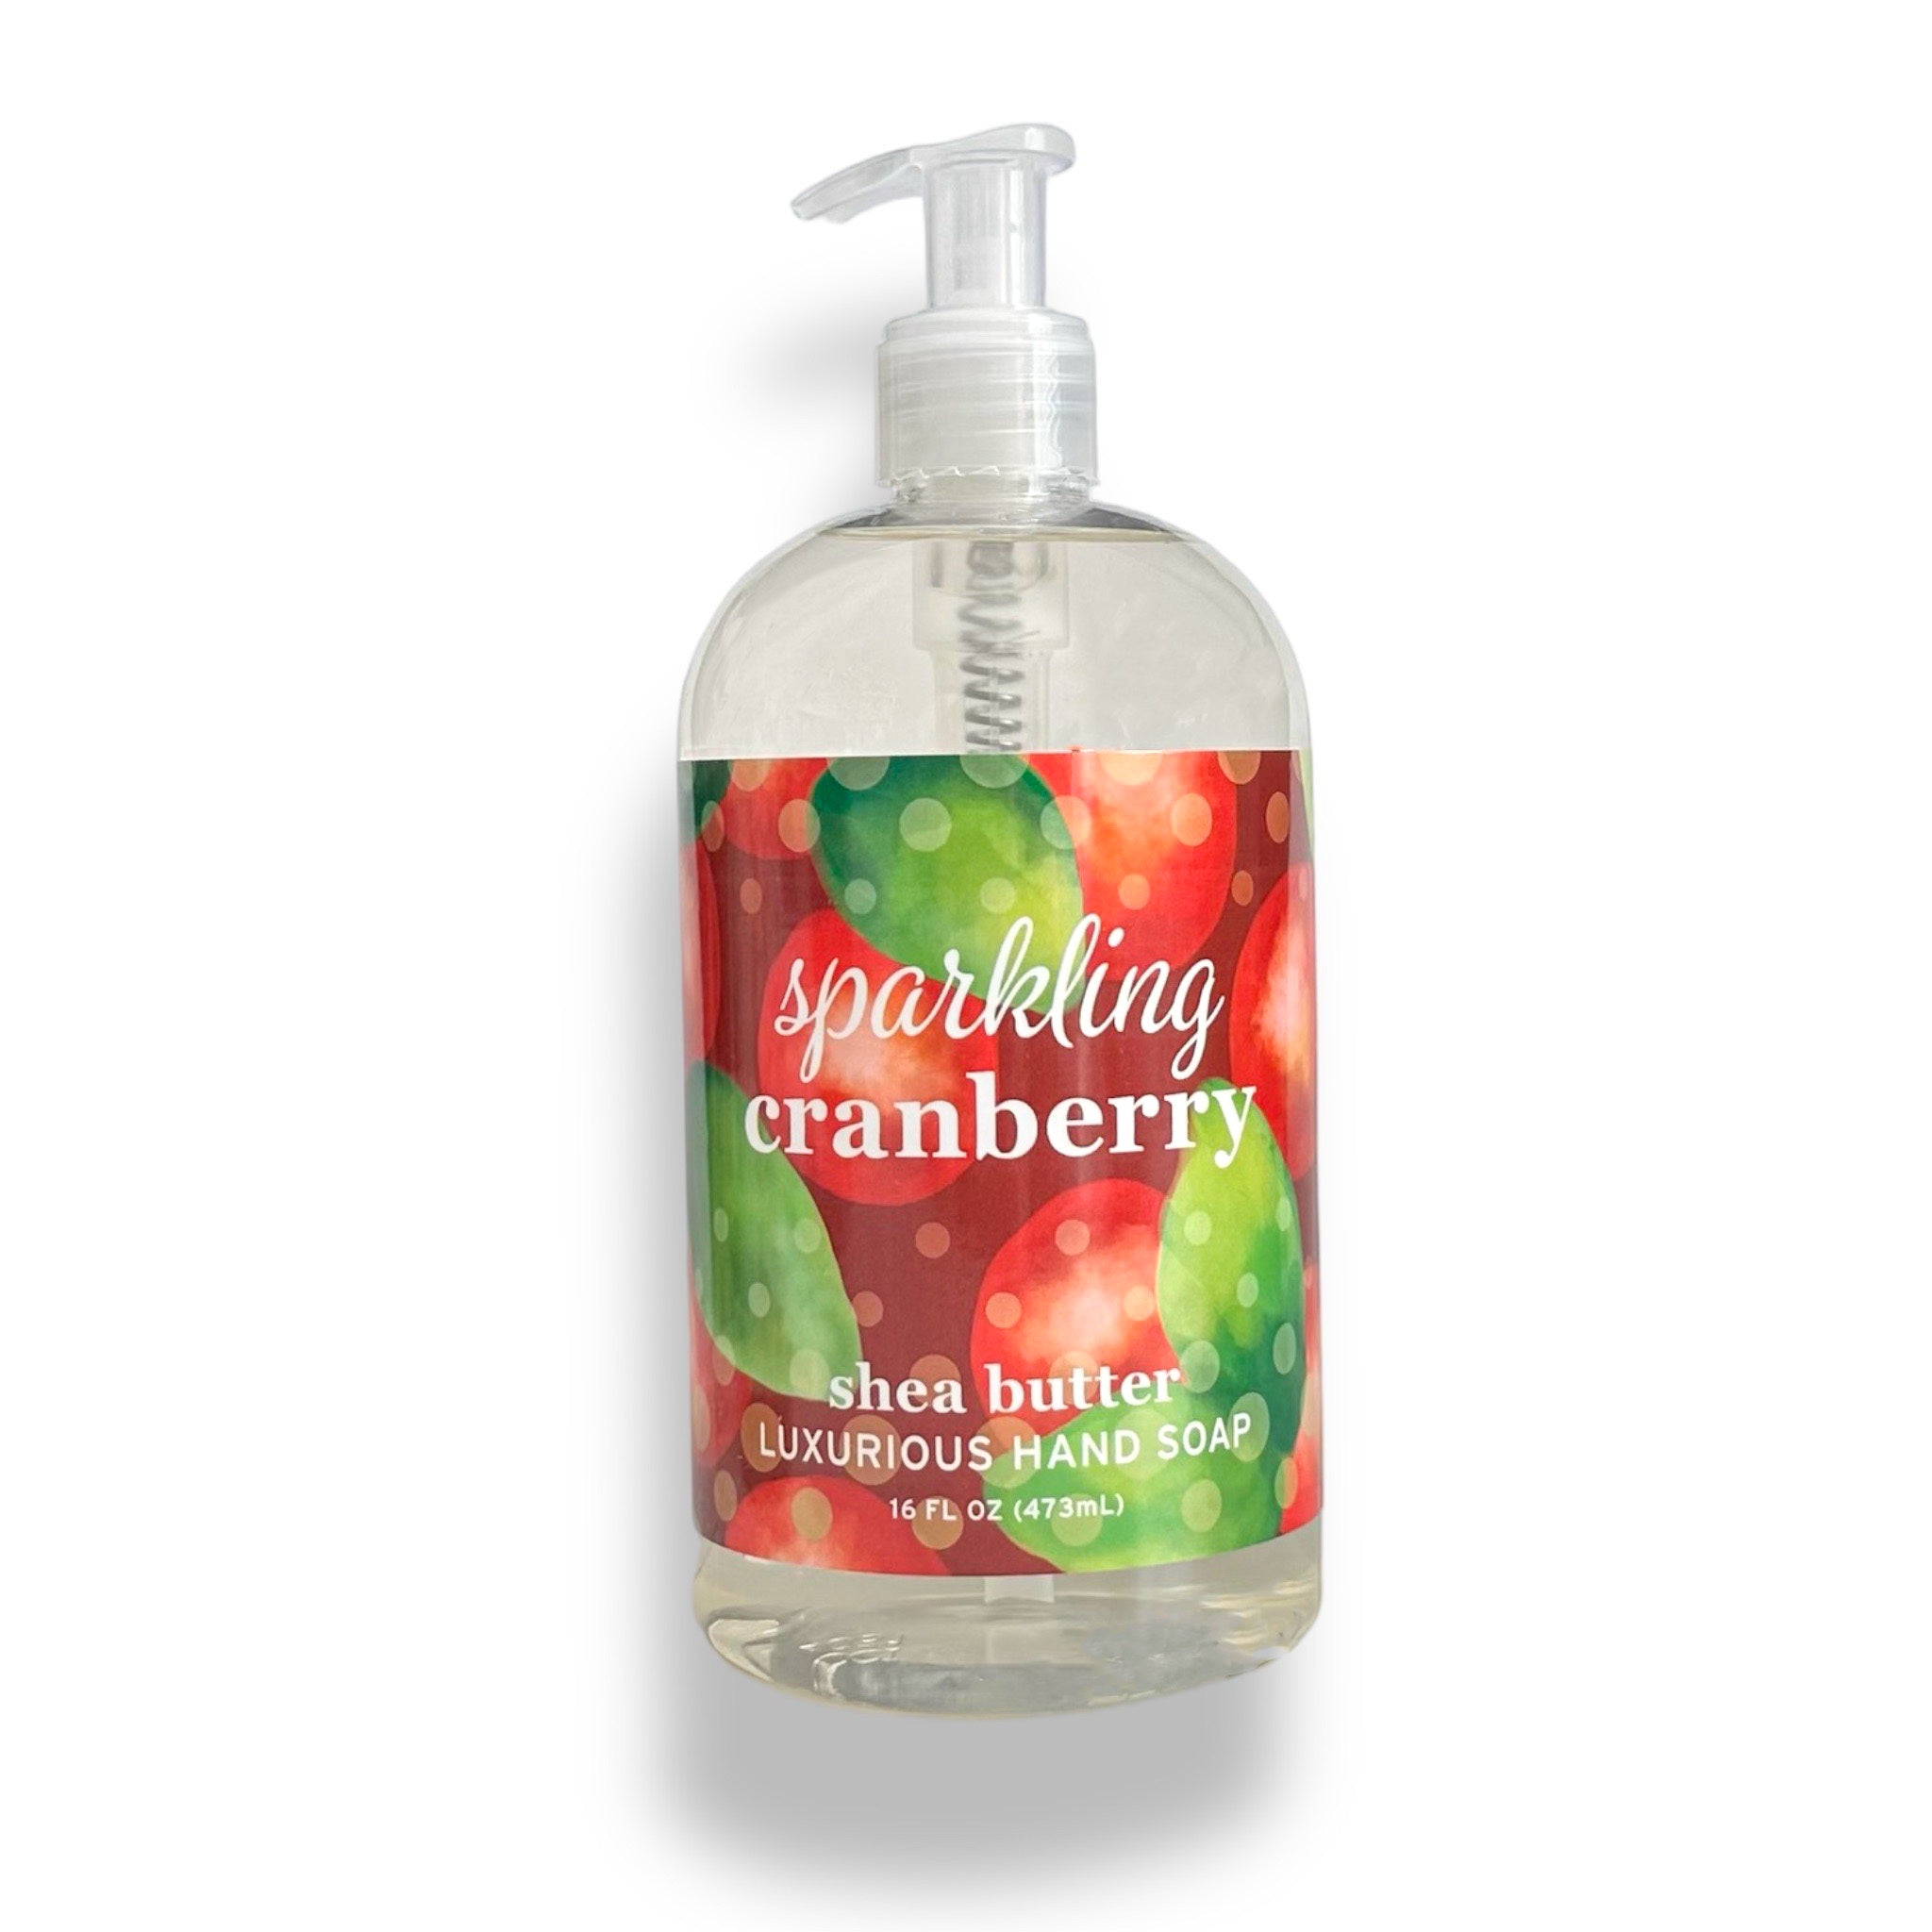 Greenwich Bay Trading Company SPARKLING CRANBERRY Hand Soap